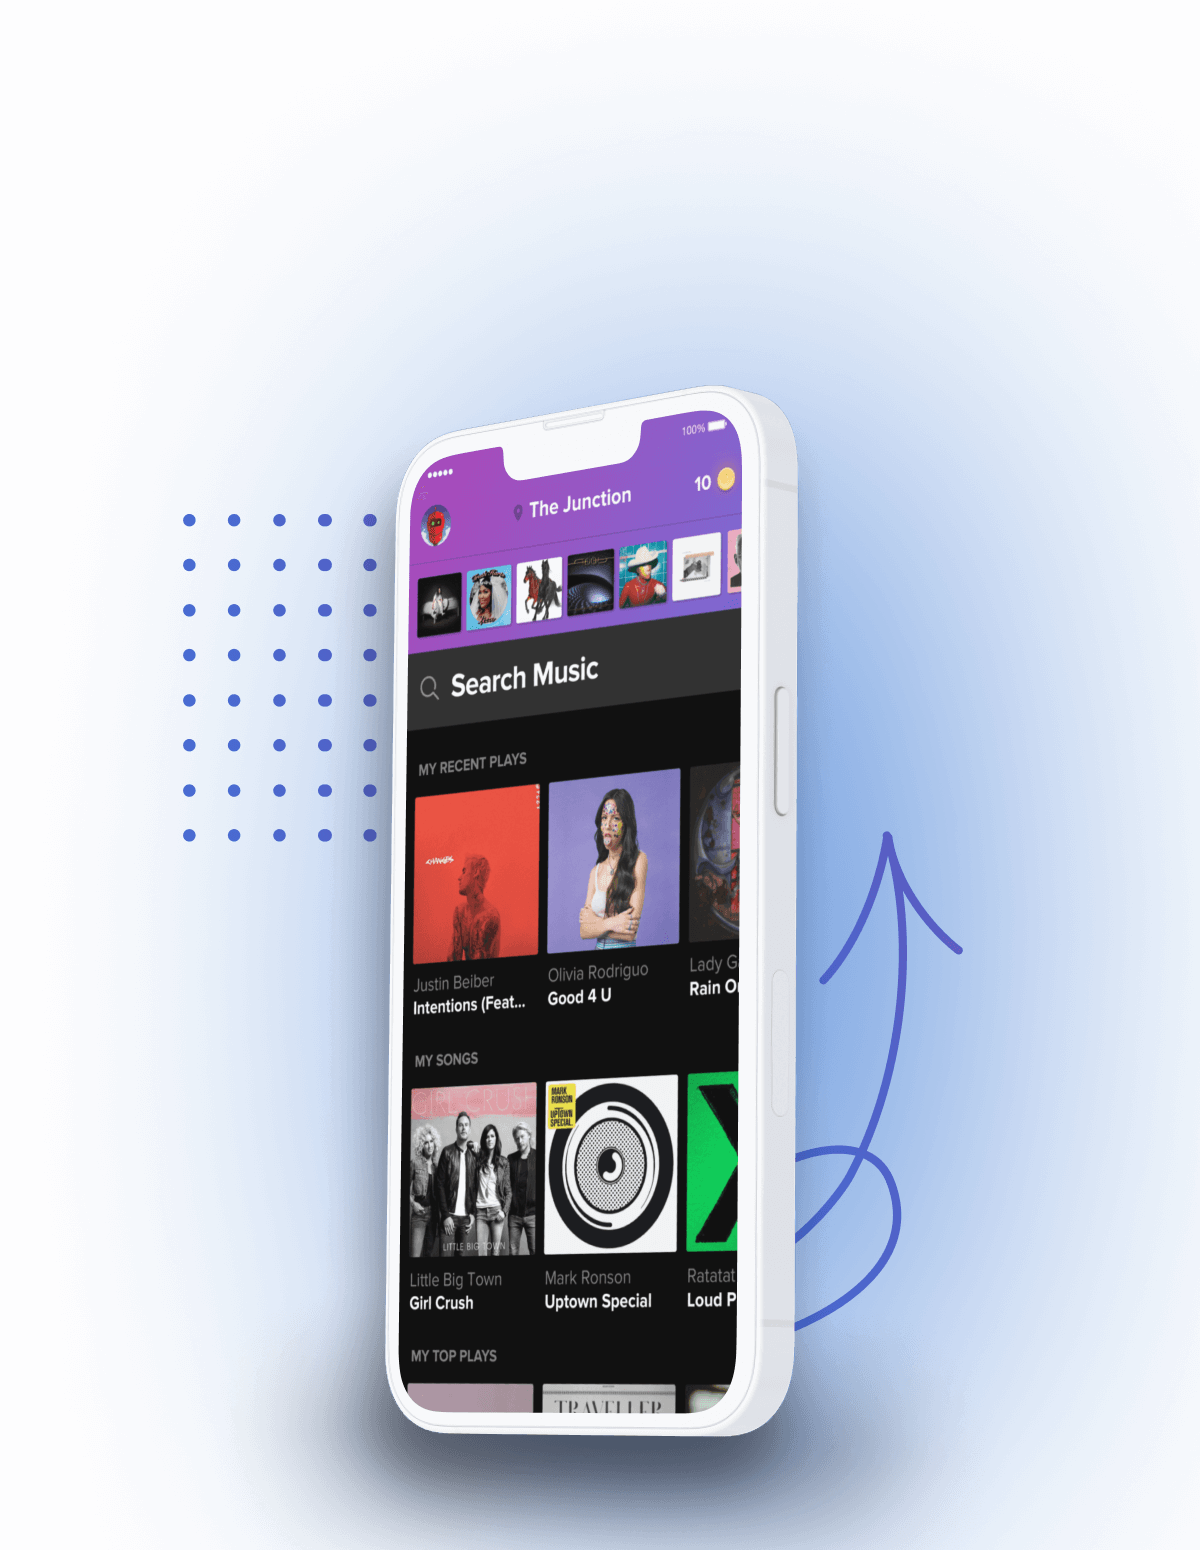 How To Skip Songs On Touchtunes App